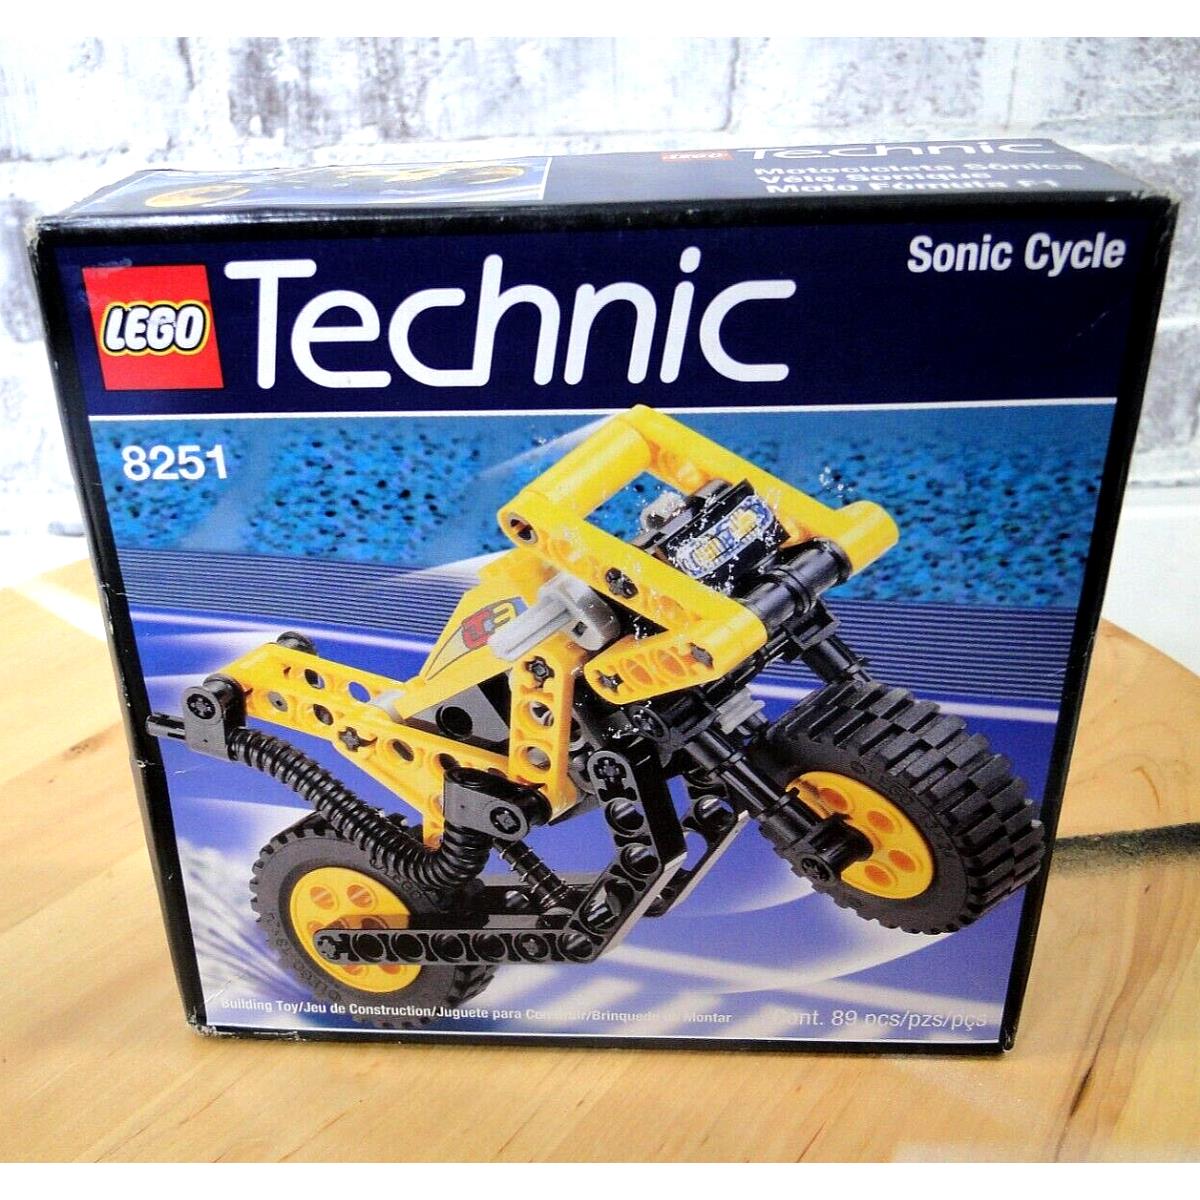 Lego 8251 Technic Sonic Cycle From 1999 Vintage